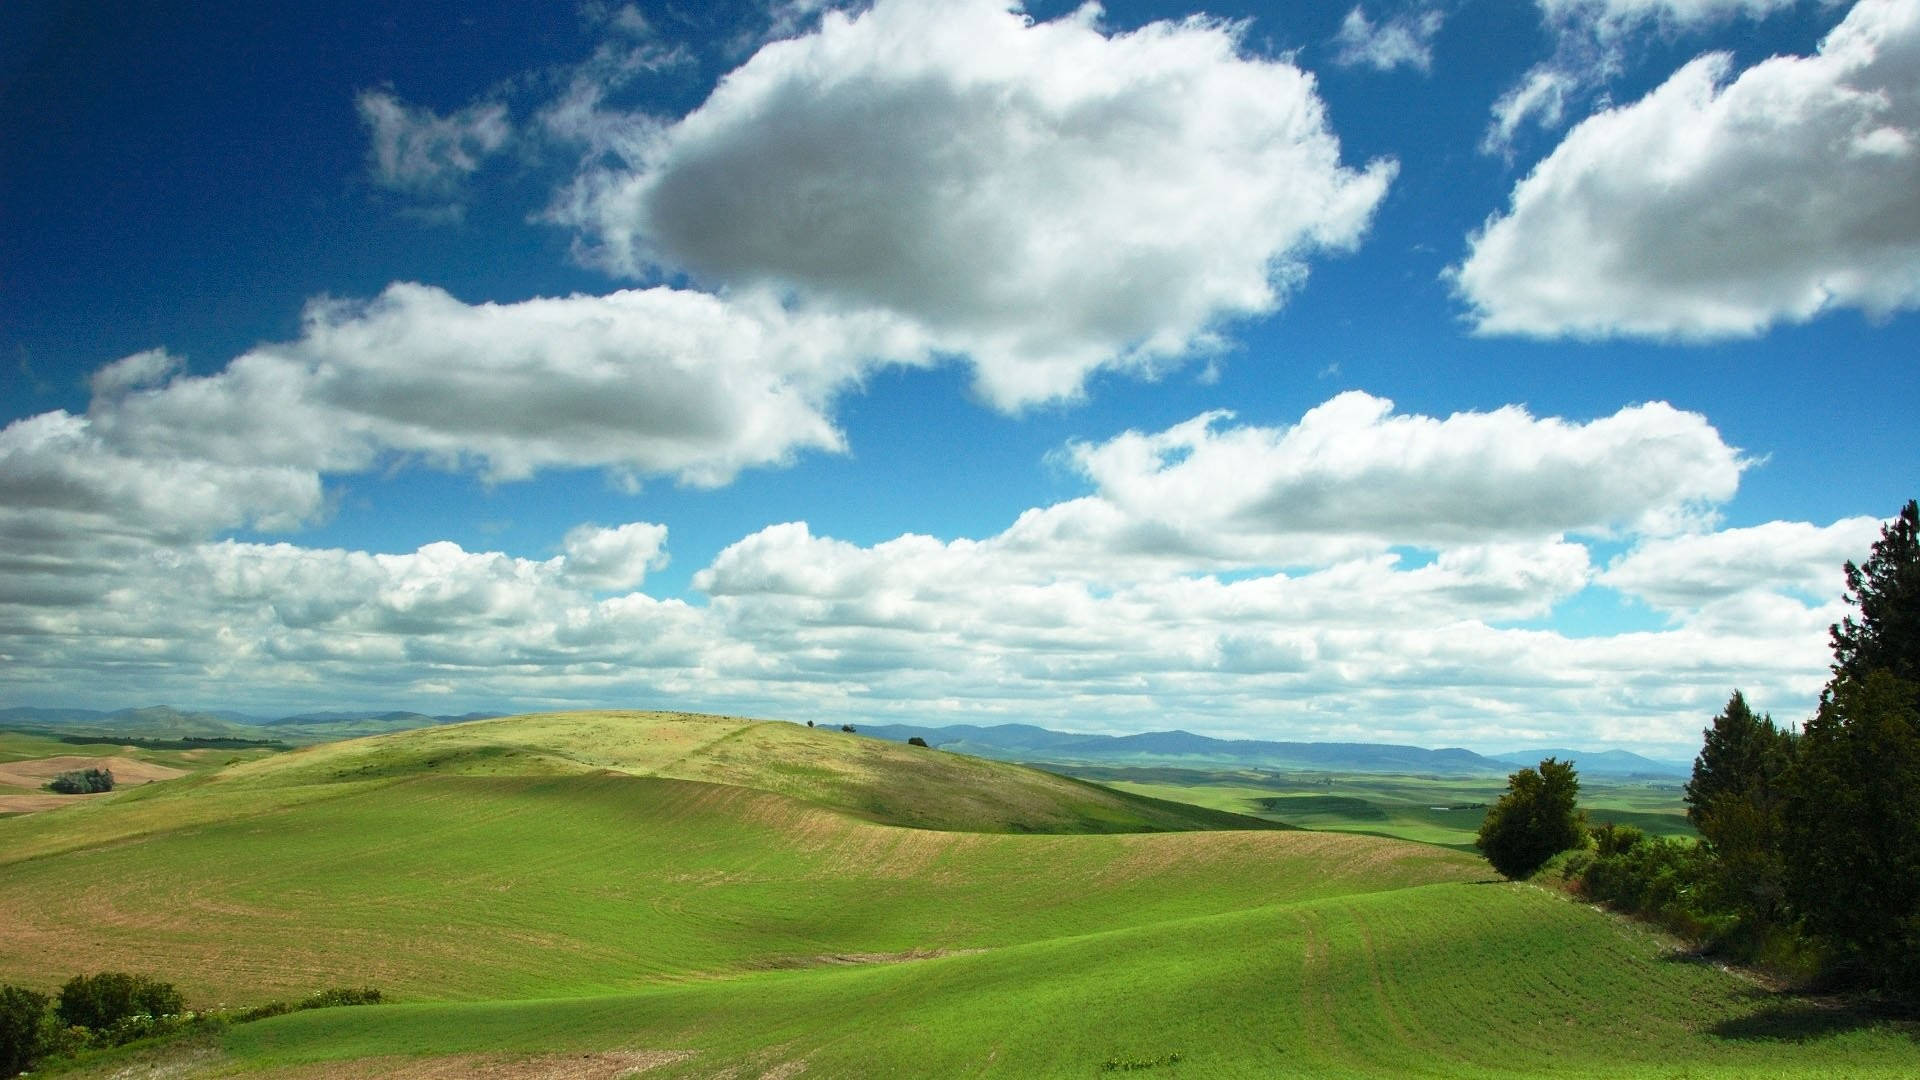 Hd Scenery Clouds Over Hills Wallpaper